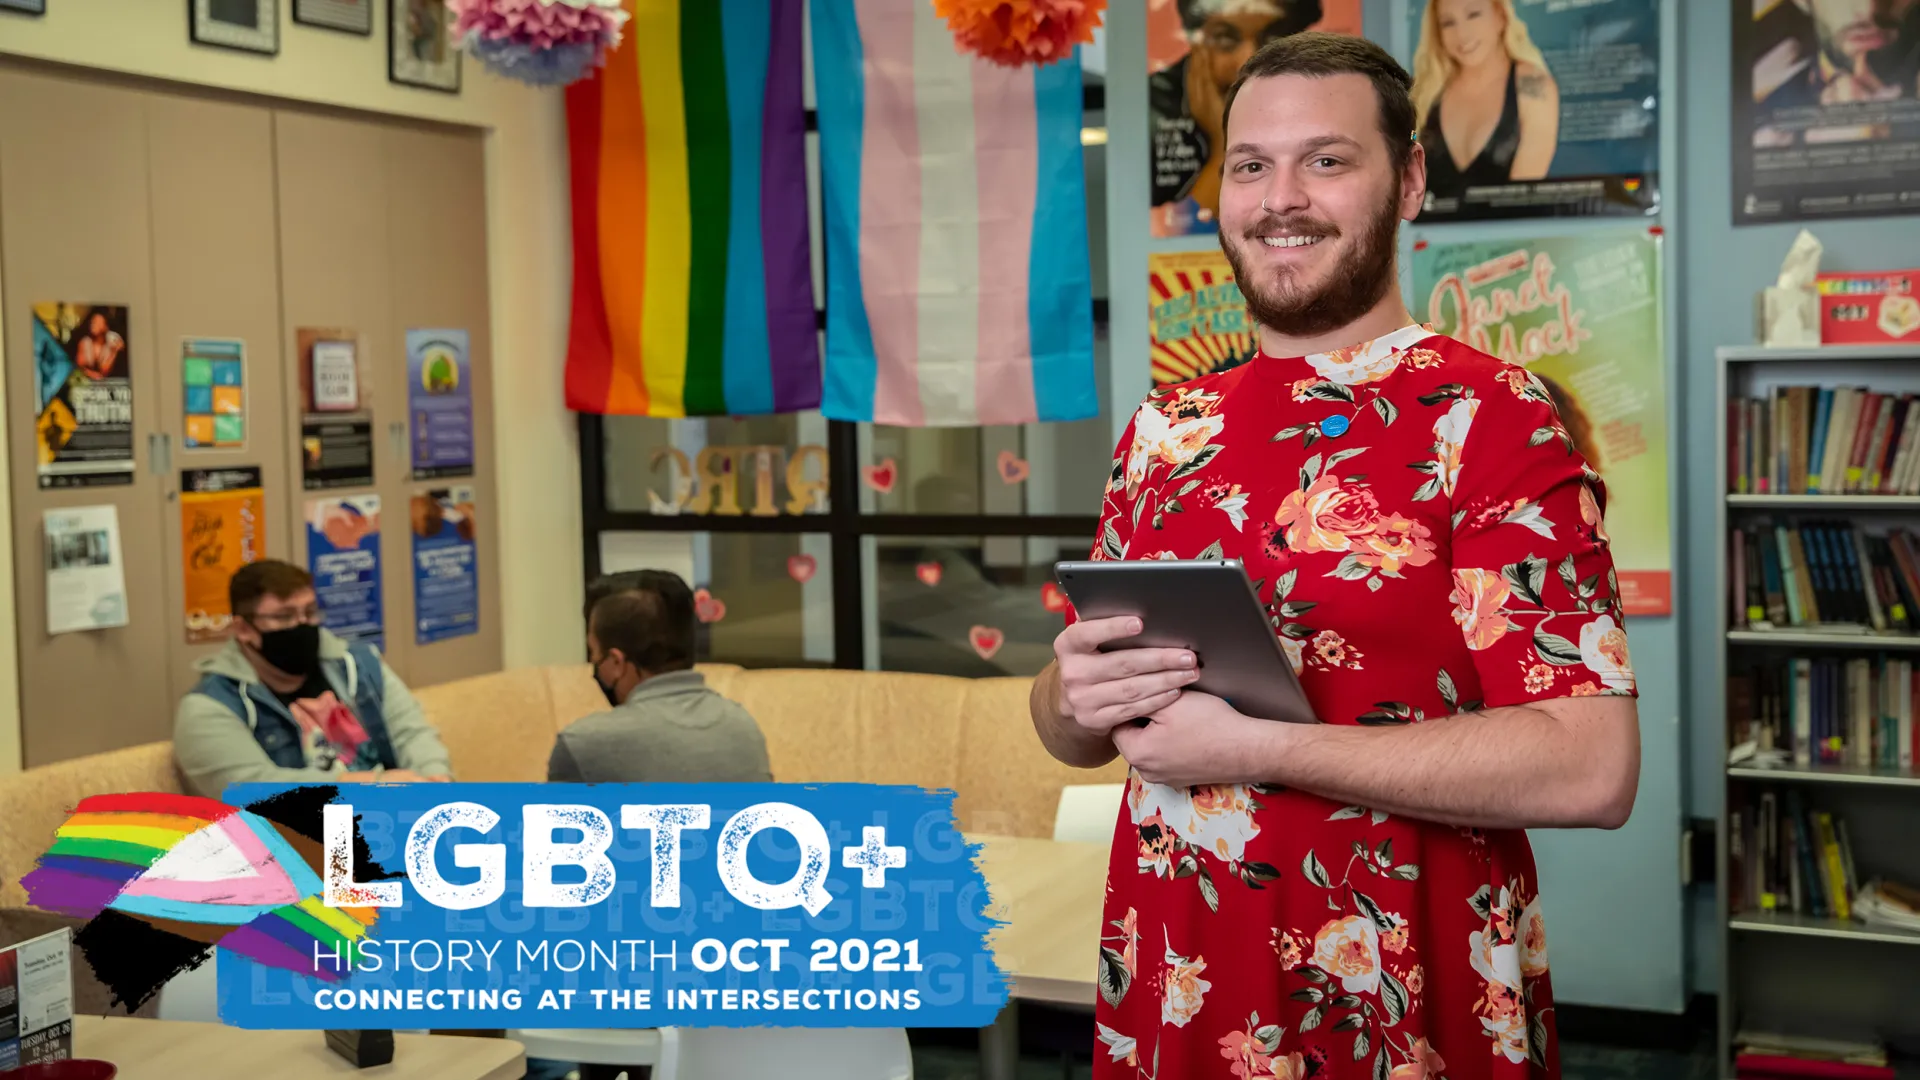 Lee Stovall, Queer and Transgender Resource Center coordinator